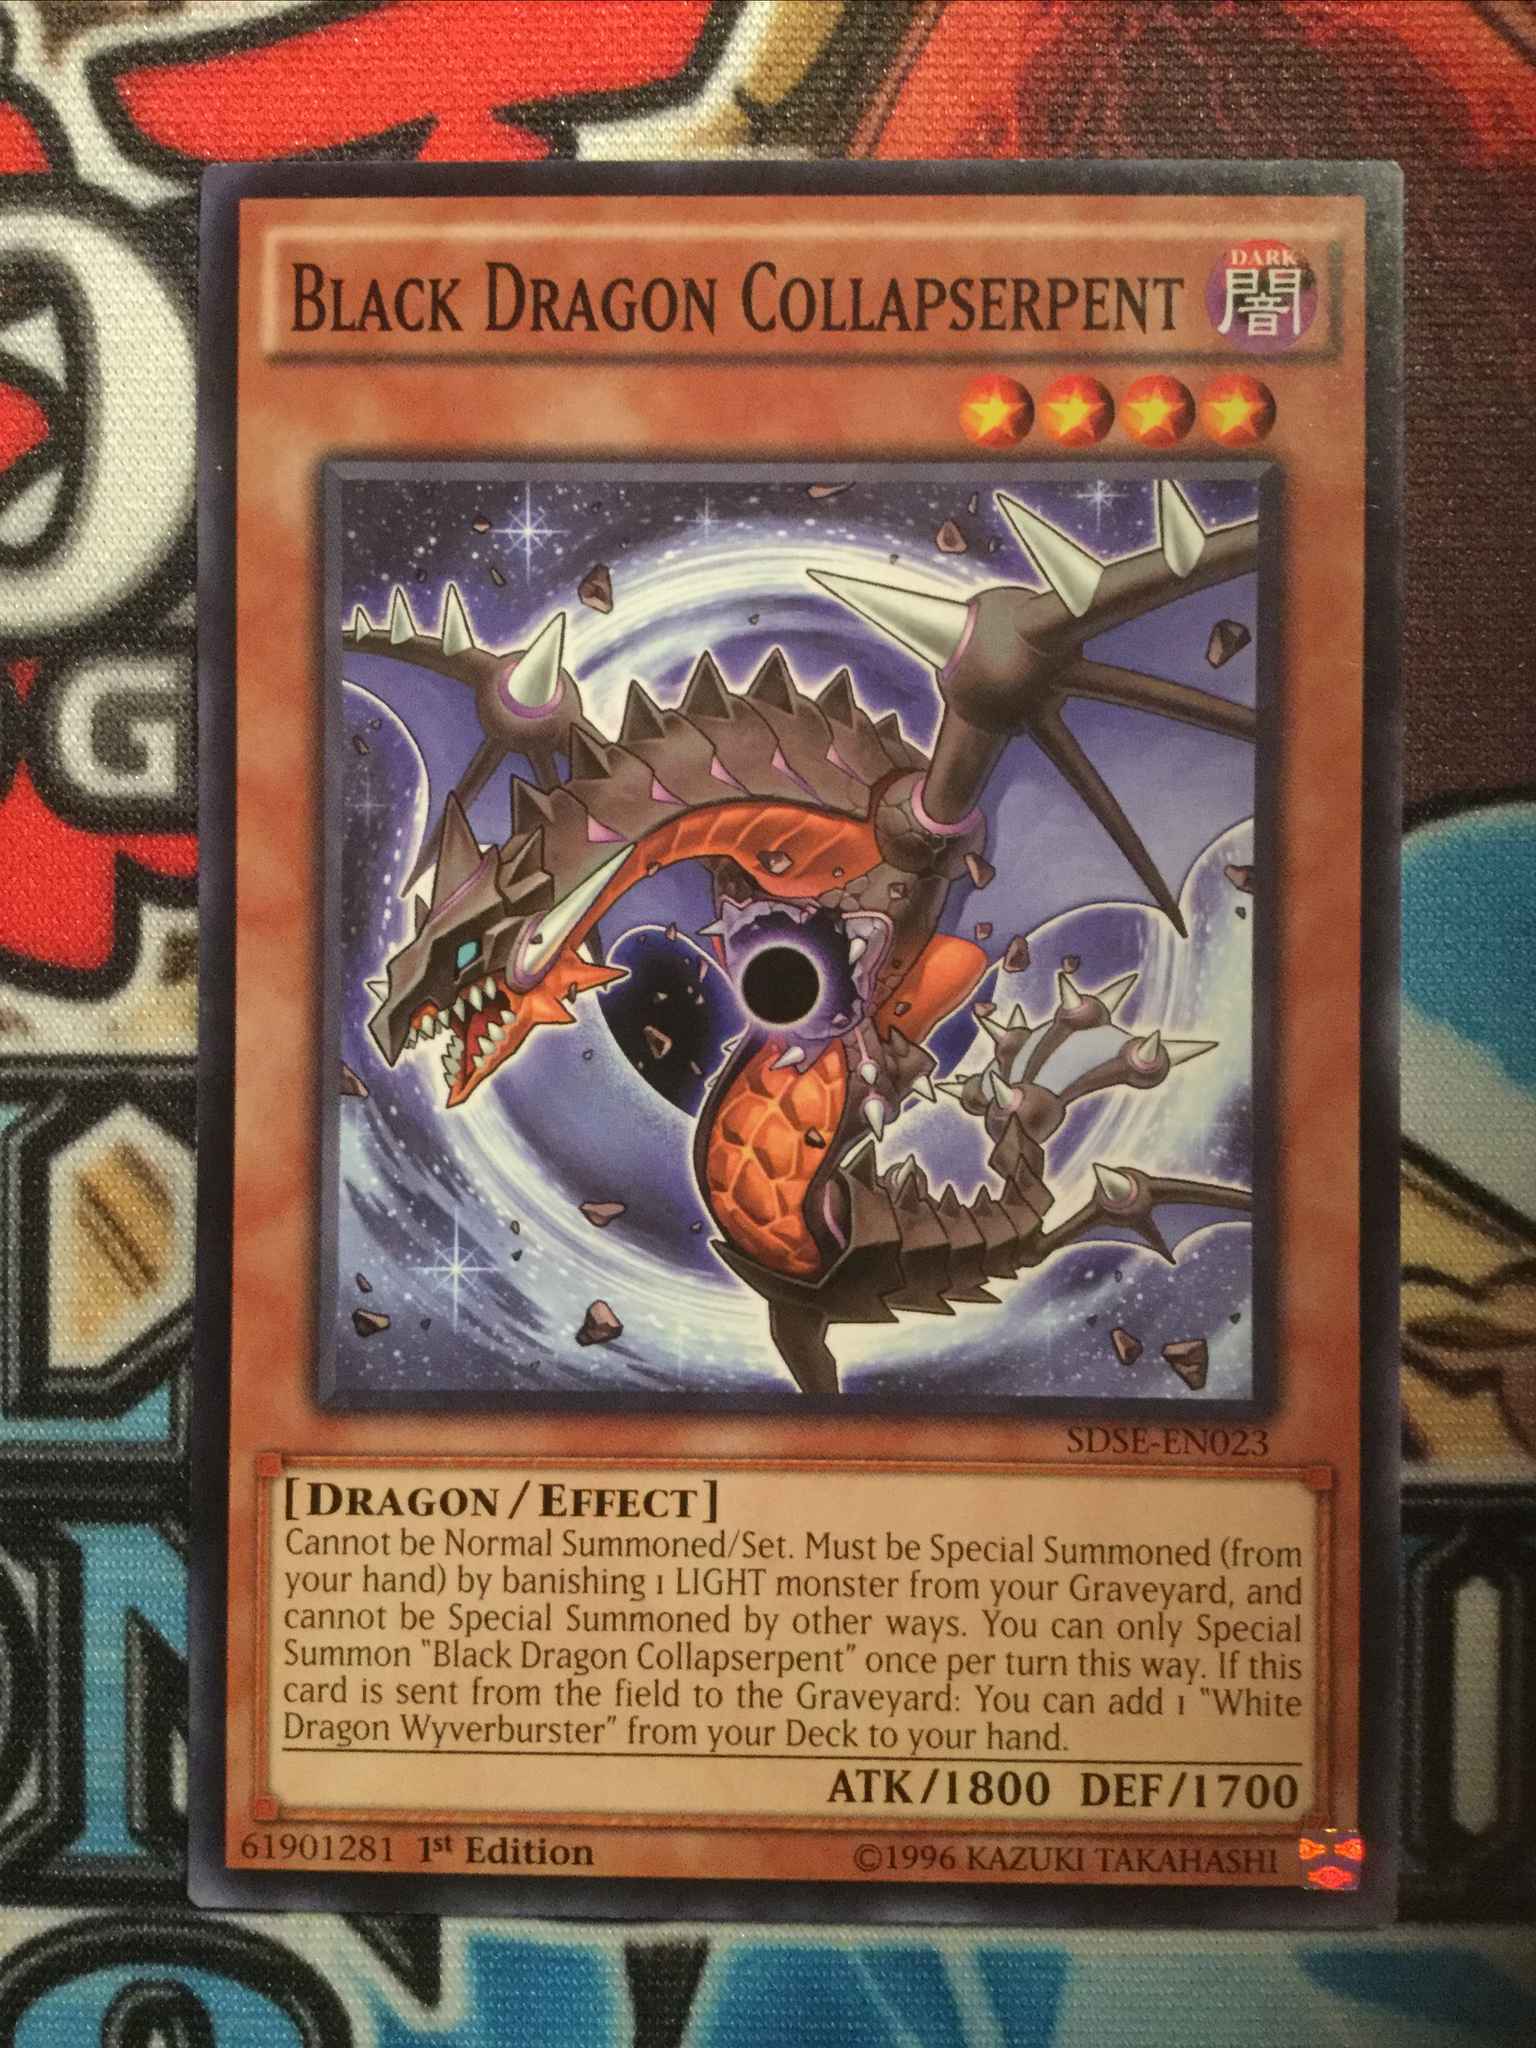 Common 1st Edition NM. BLACK DRAGON COLLAPSERPENT SDSE-EN023 Yu-Gi-Oh 